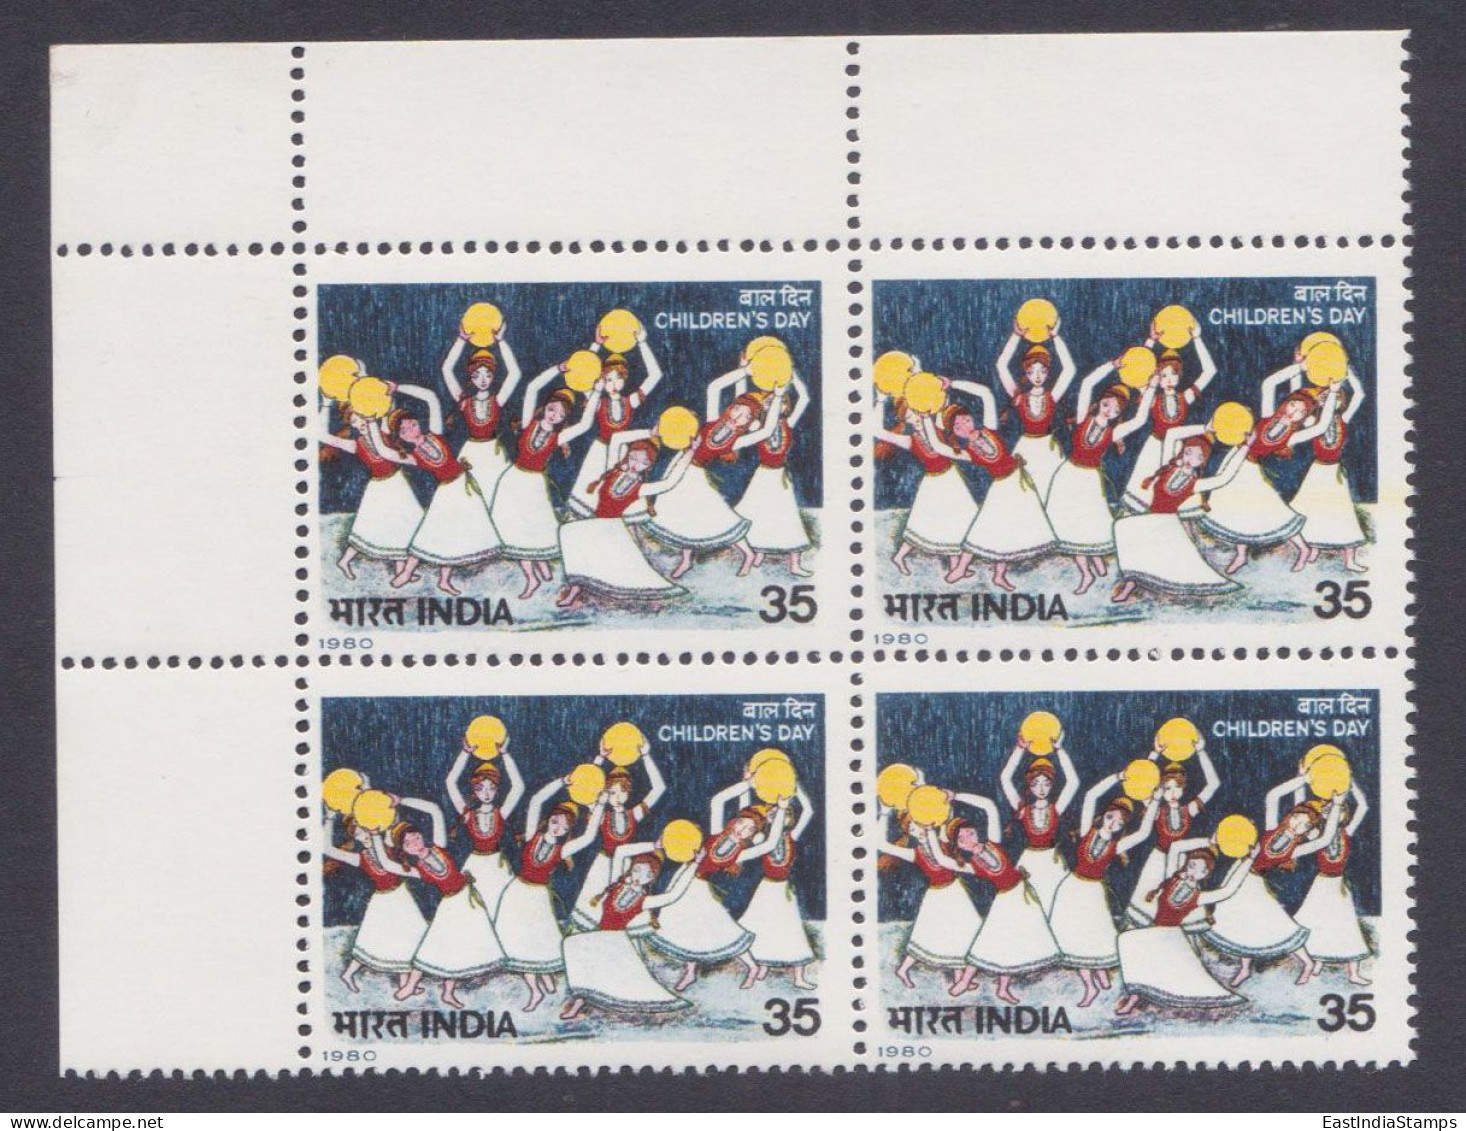 Inde India 1980 MNH Children's Day, Children, Drawing, Art, Painting, Dancing Women, Girls, Dance, Culture, Block - Unused Stamps